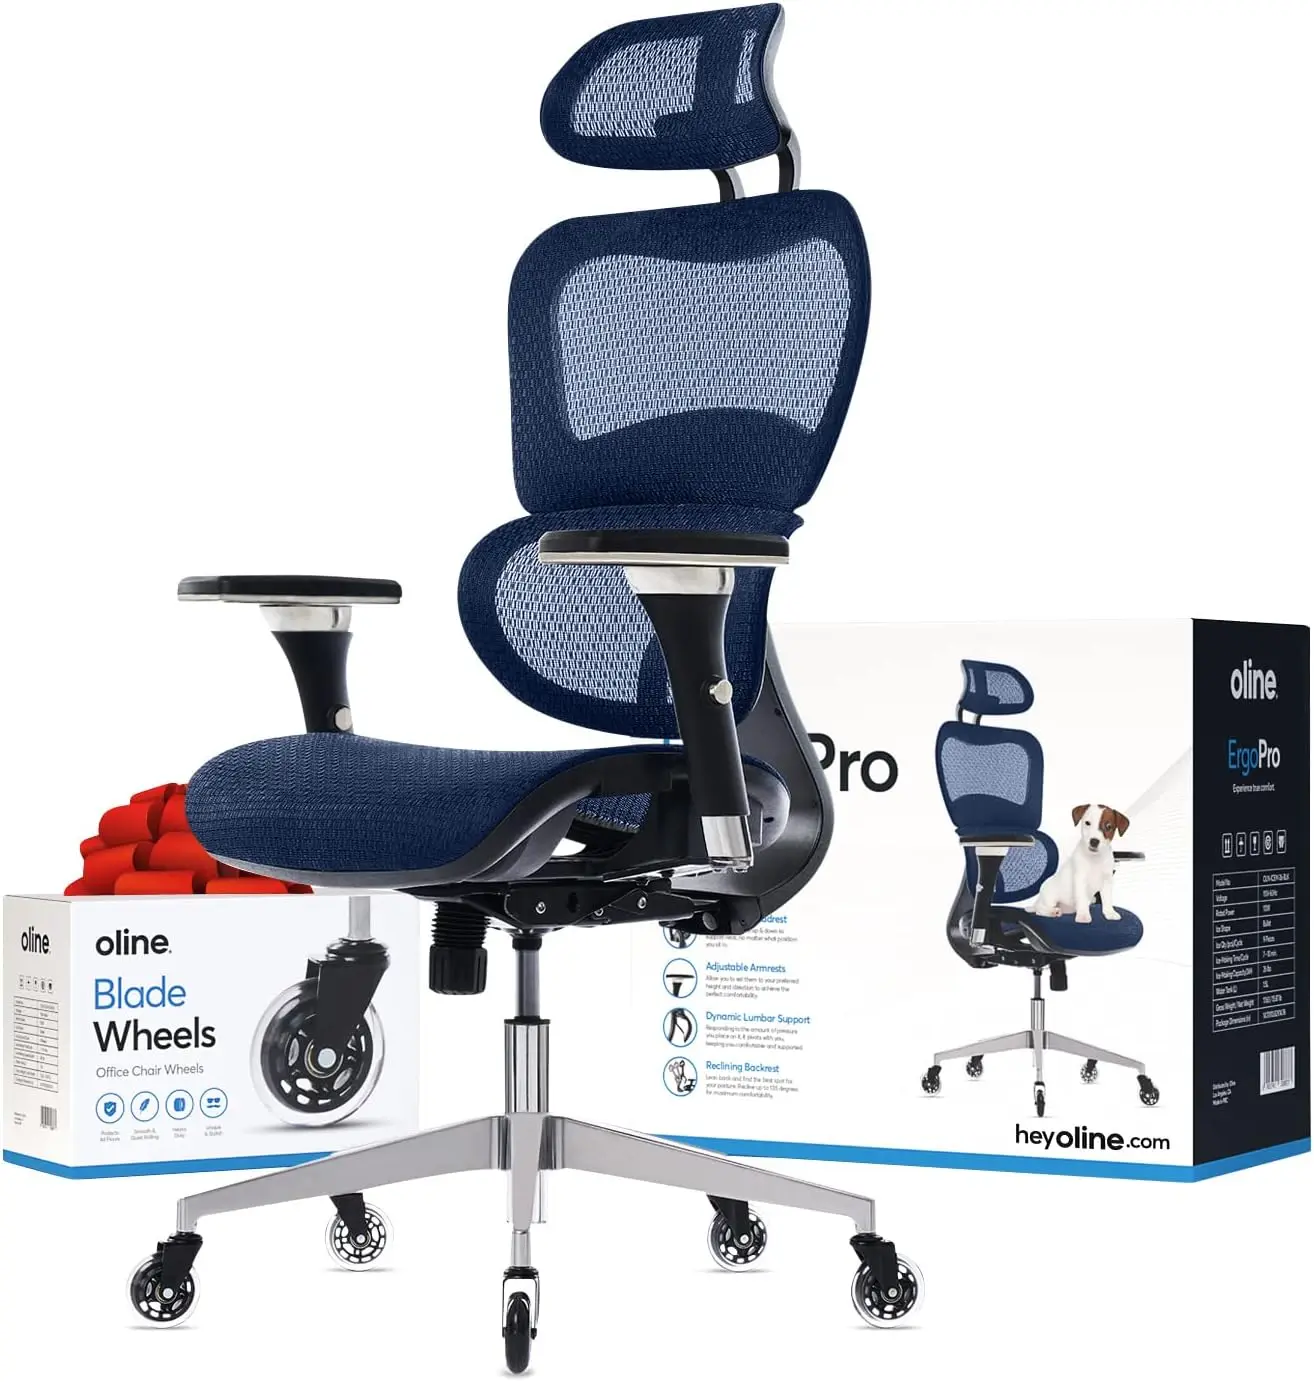 

Oline ErgoPro Ergonomic Office Chair - Rolling Desk Chair with 4D Adjustable Armrest, 3D Lumbar Support and Blade Wheels - Mesh